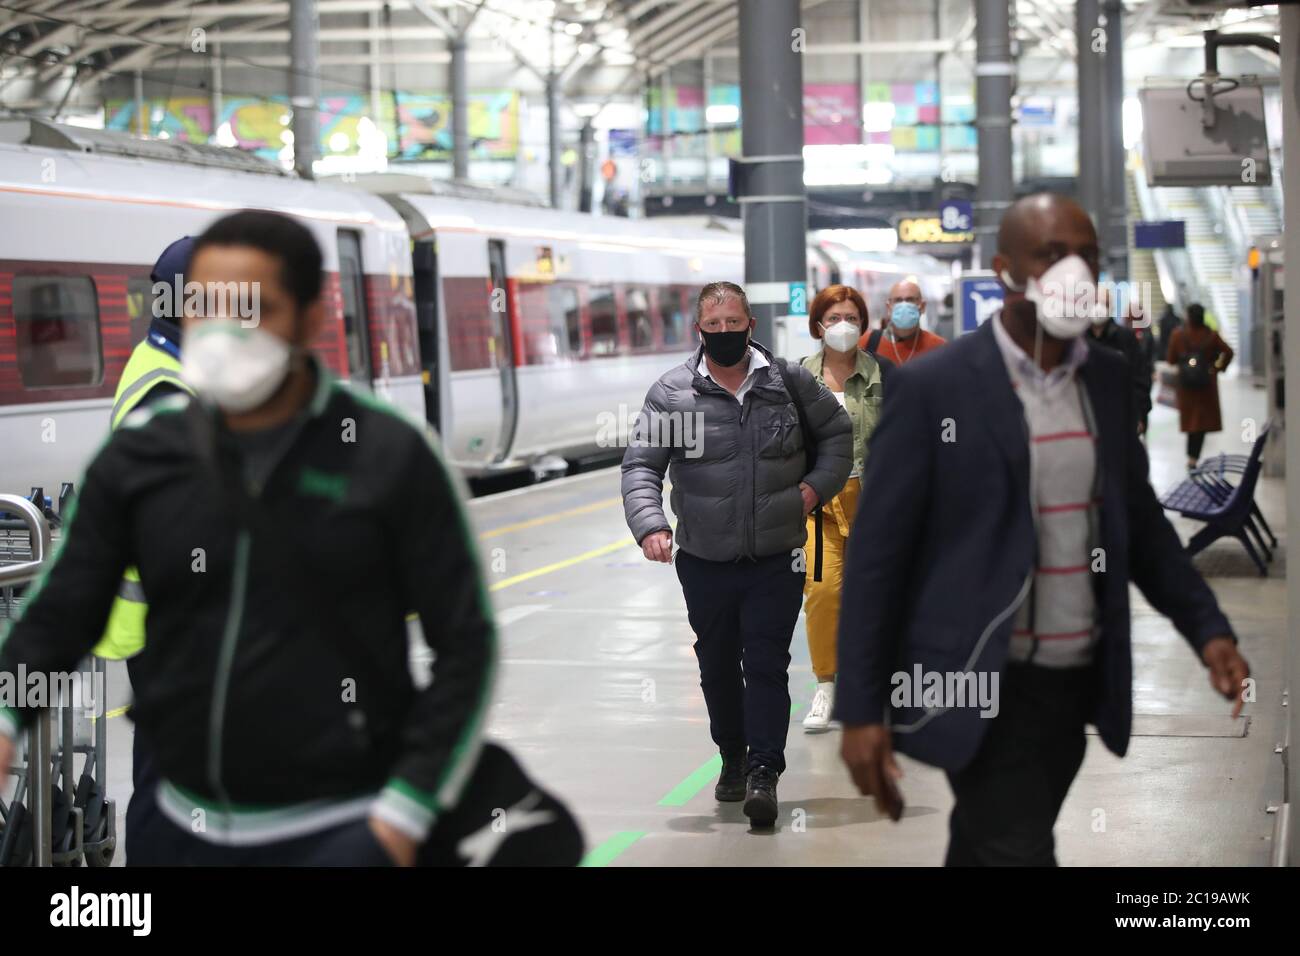 Passengers wearing face masks at Leeds railway station as face coverings become mandatory on public transport in England with the easing of further lockdown restrictions during the coronavirus pandemic. Stock Photo